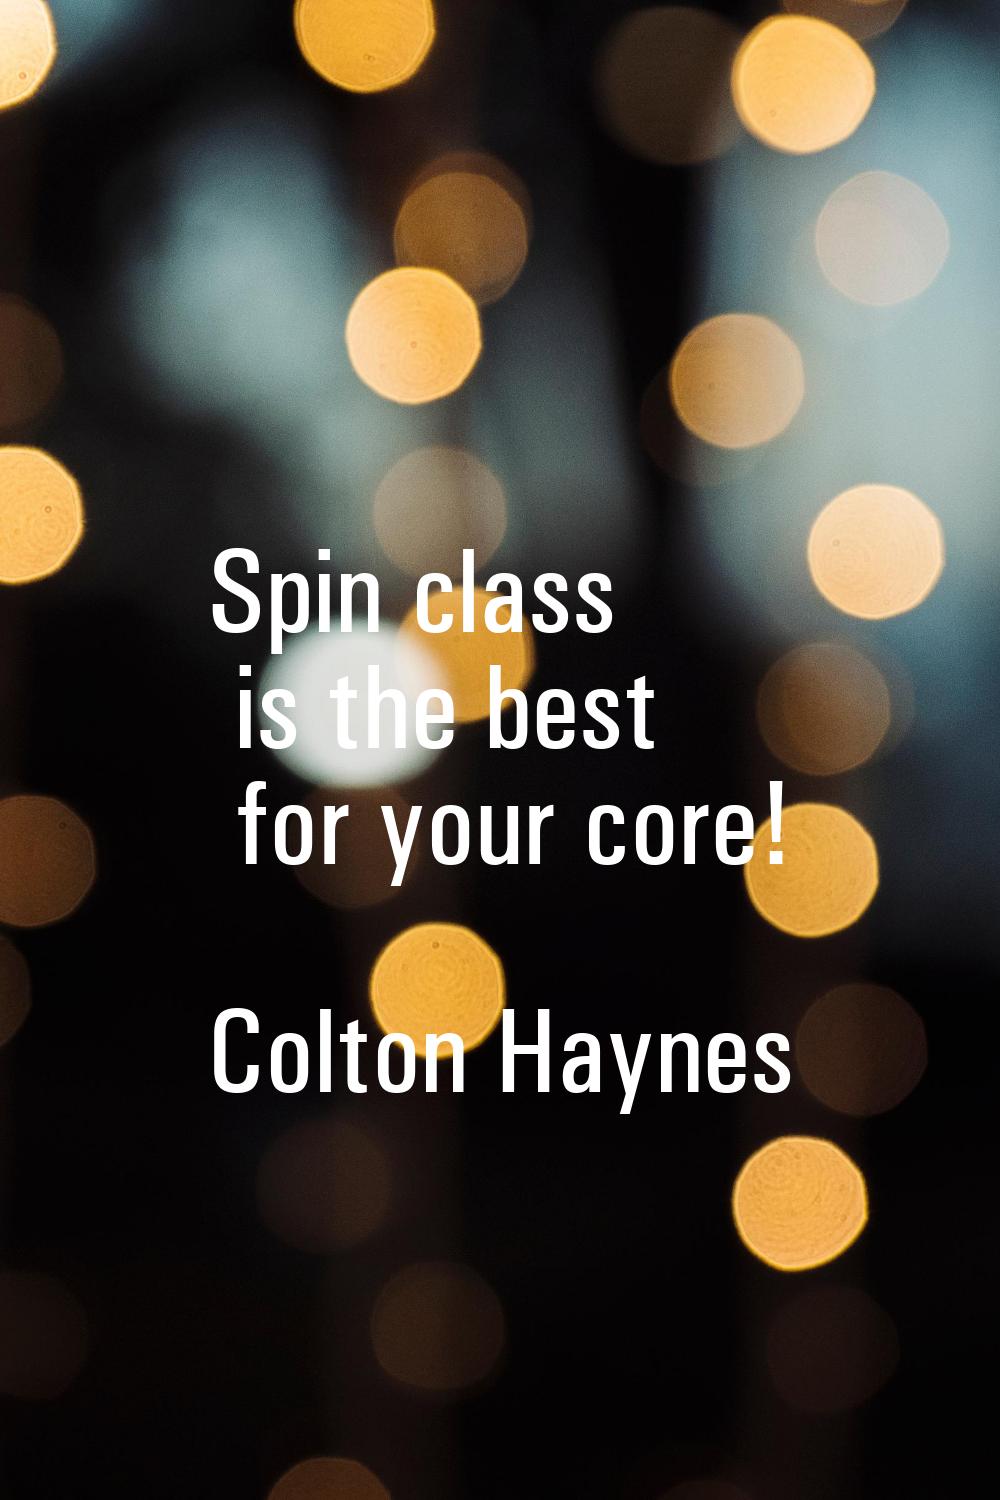 Spin class is the best for your core!